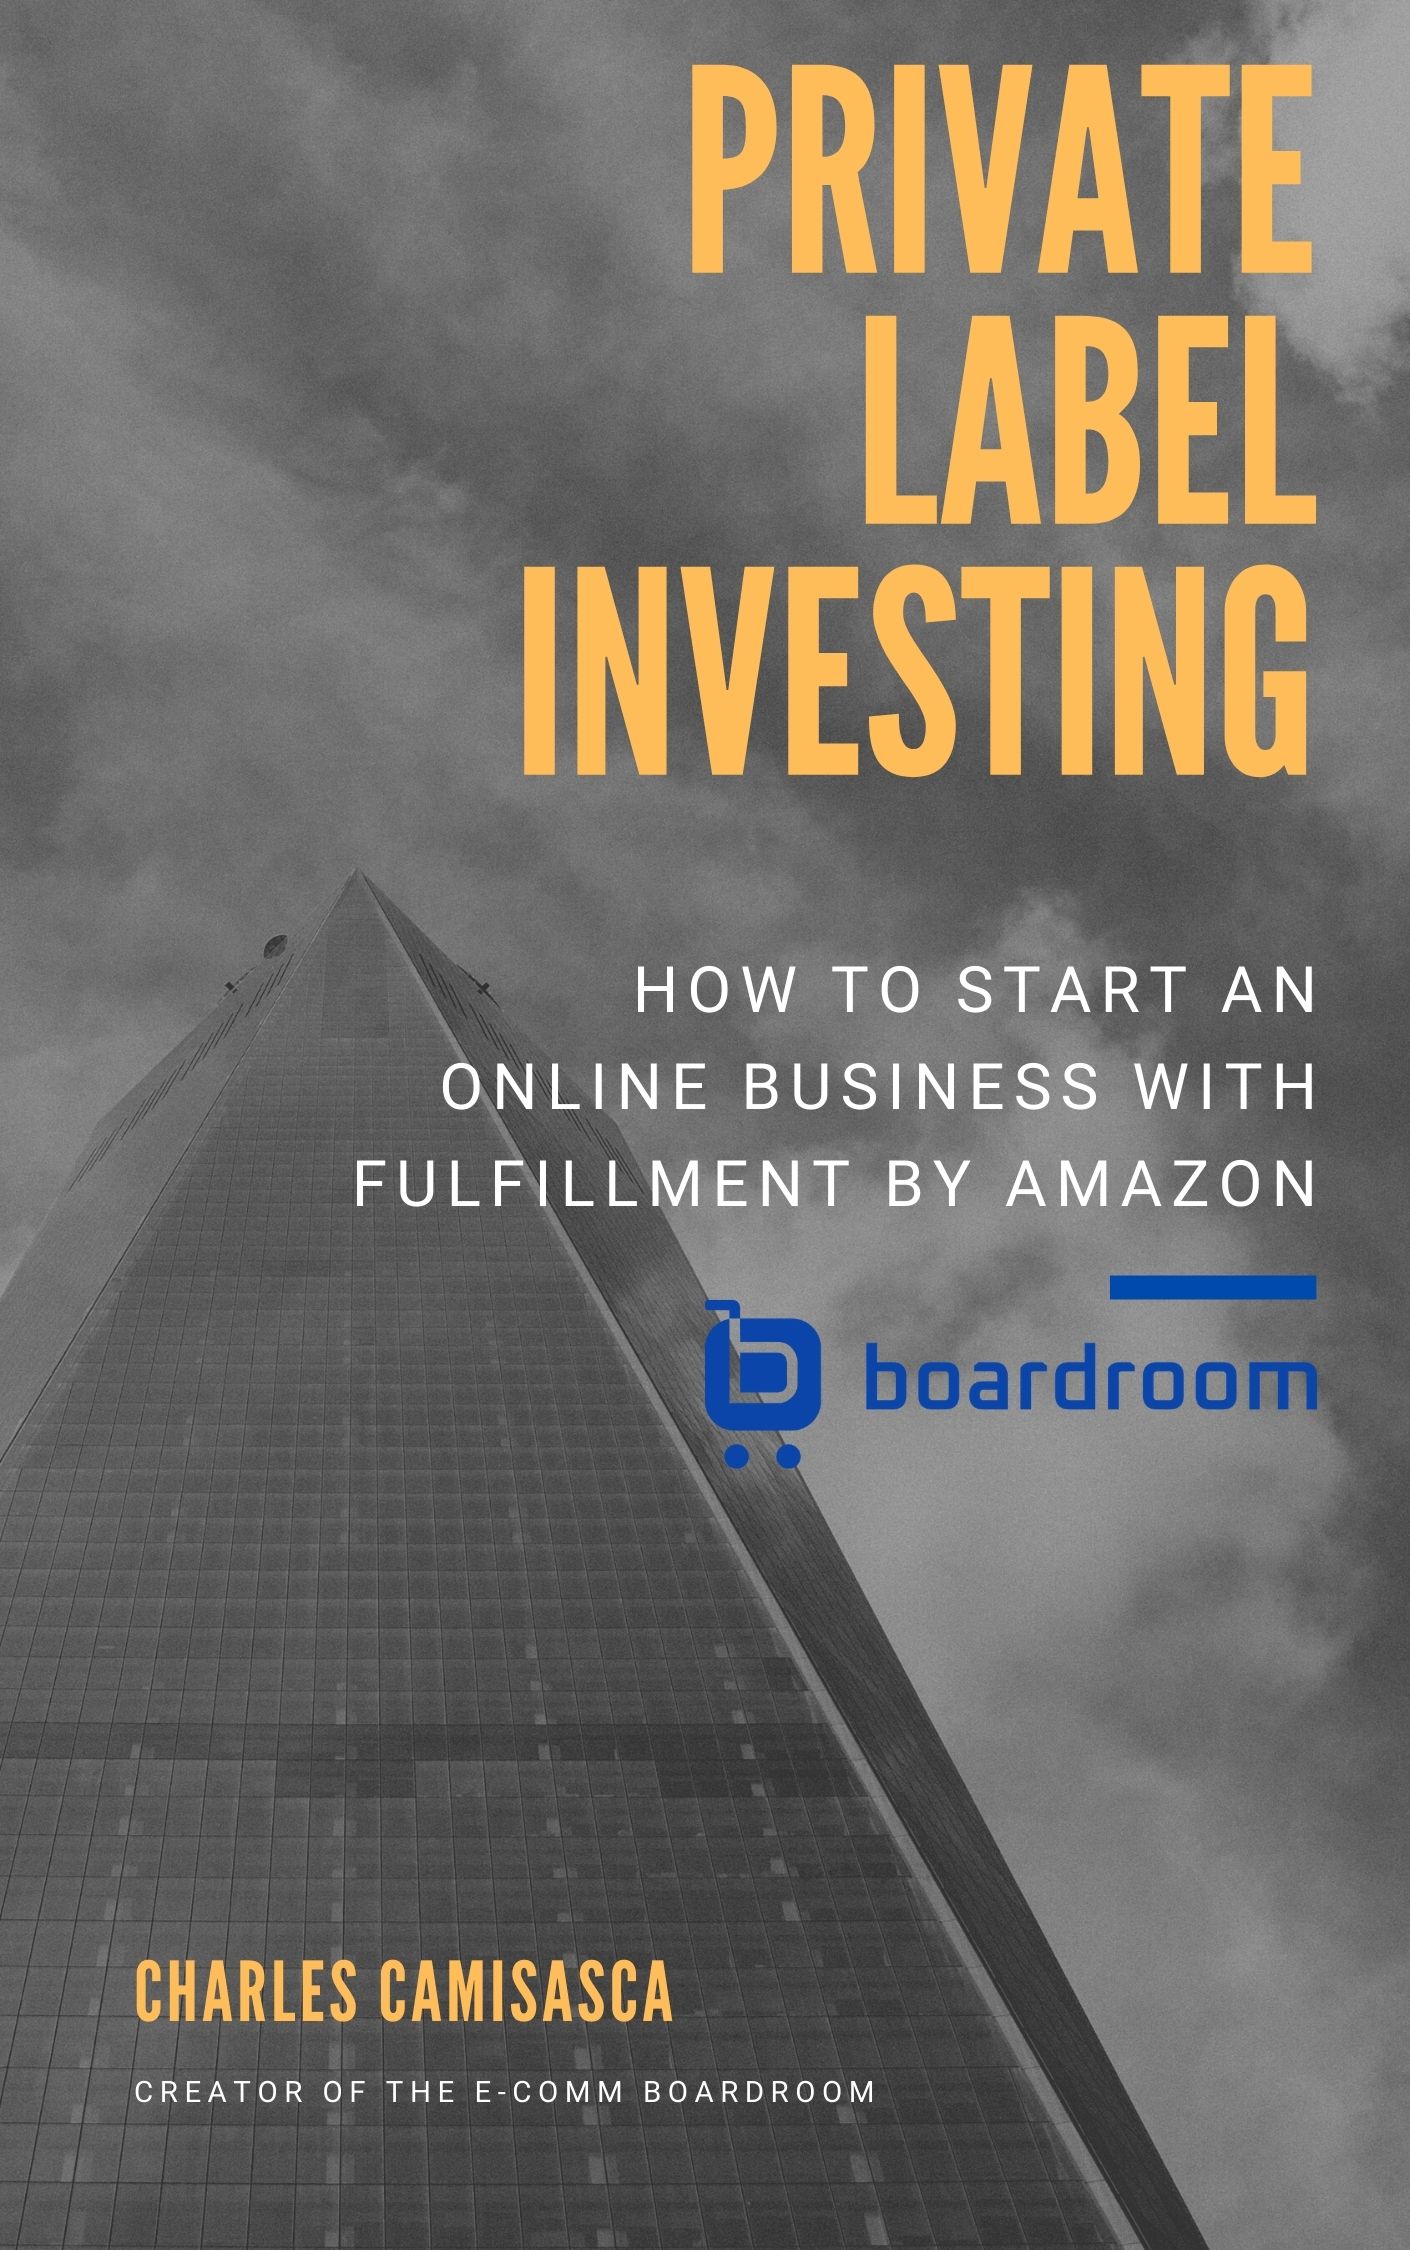 FREE: Private Label Investing: How to Start an Online Business with Fulfillment by Amazon by Charles Camisasca by Charles Camisasca